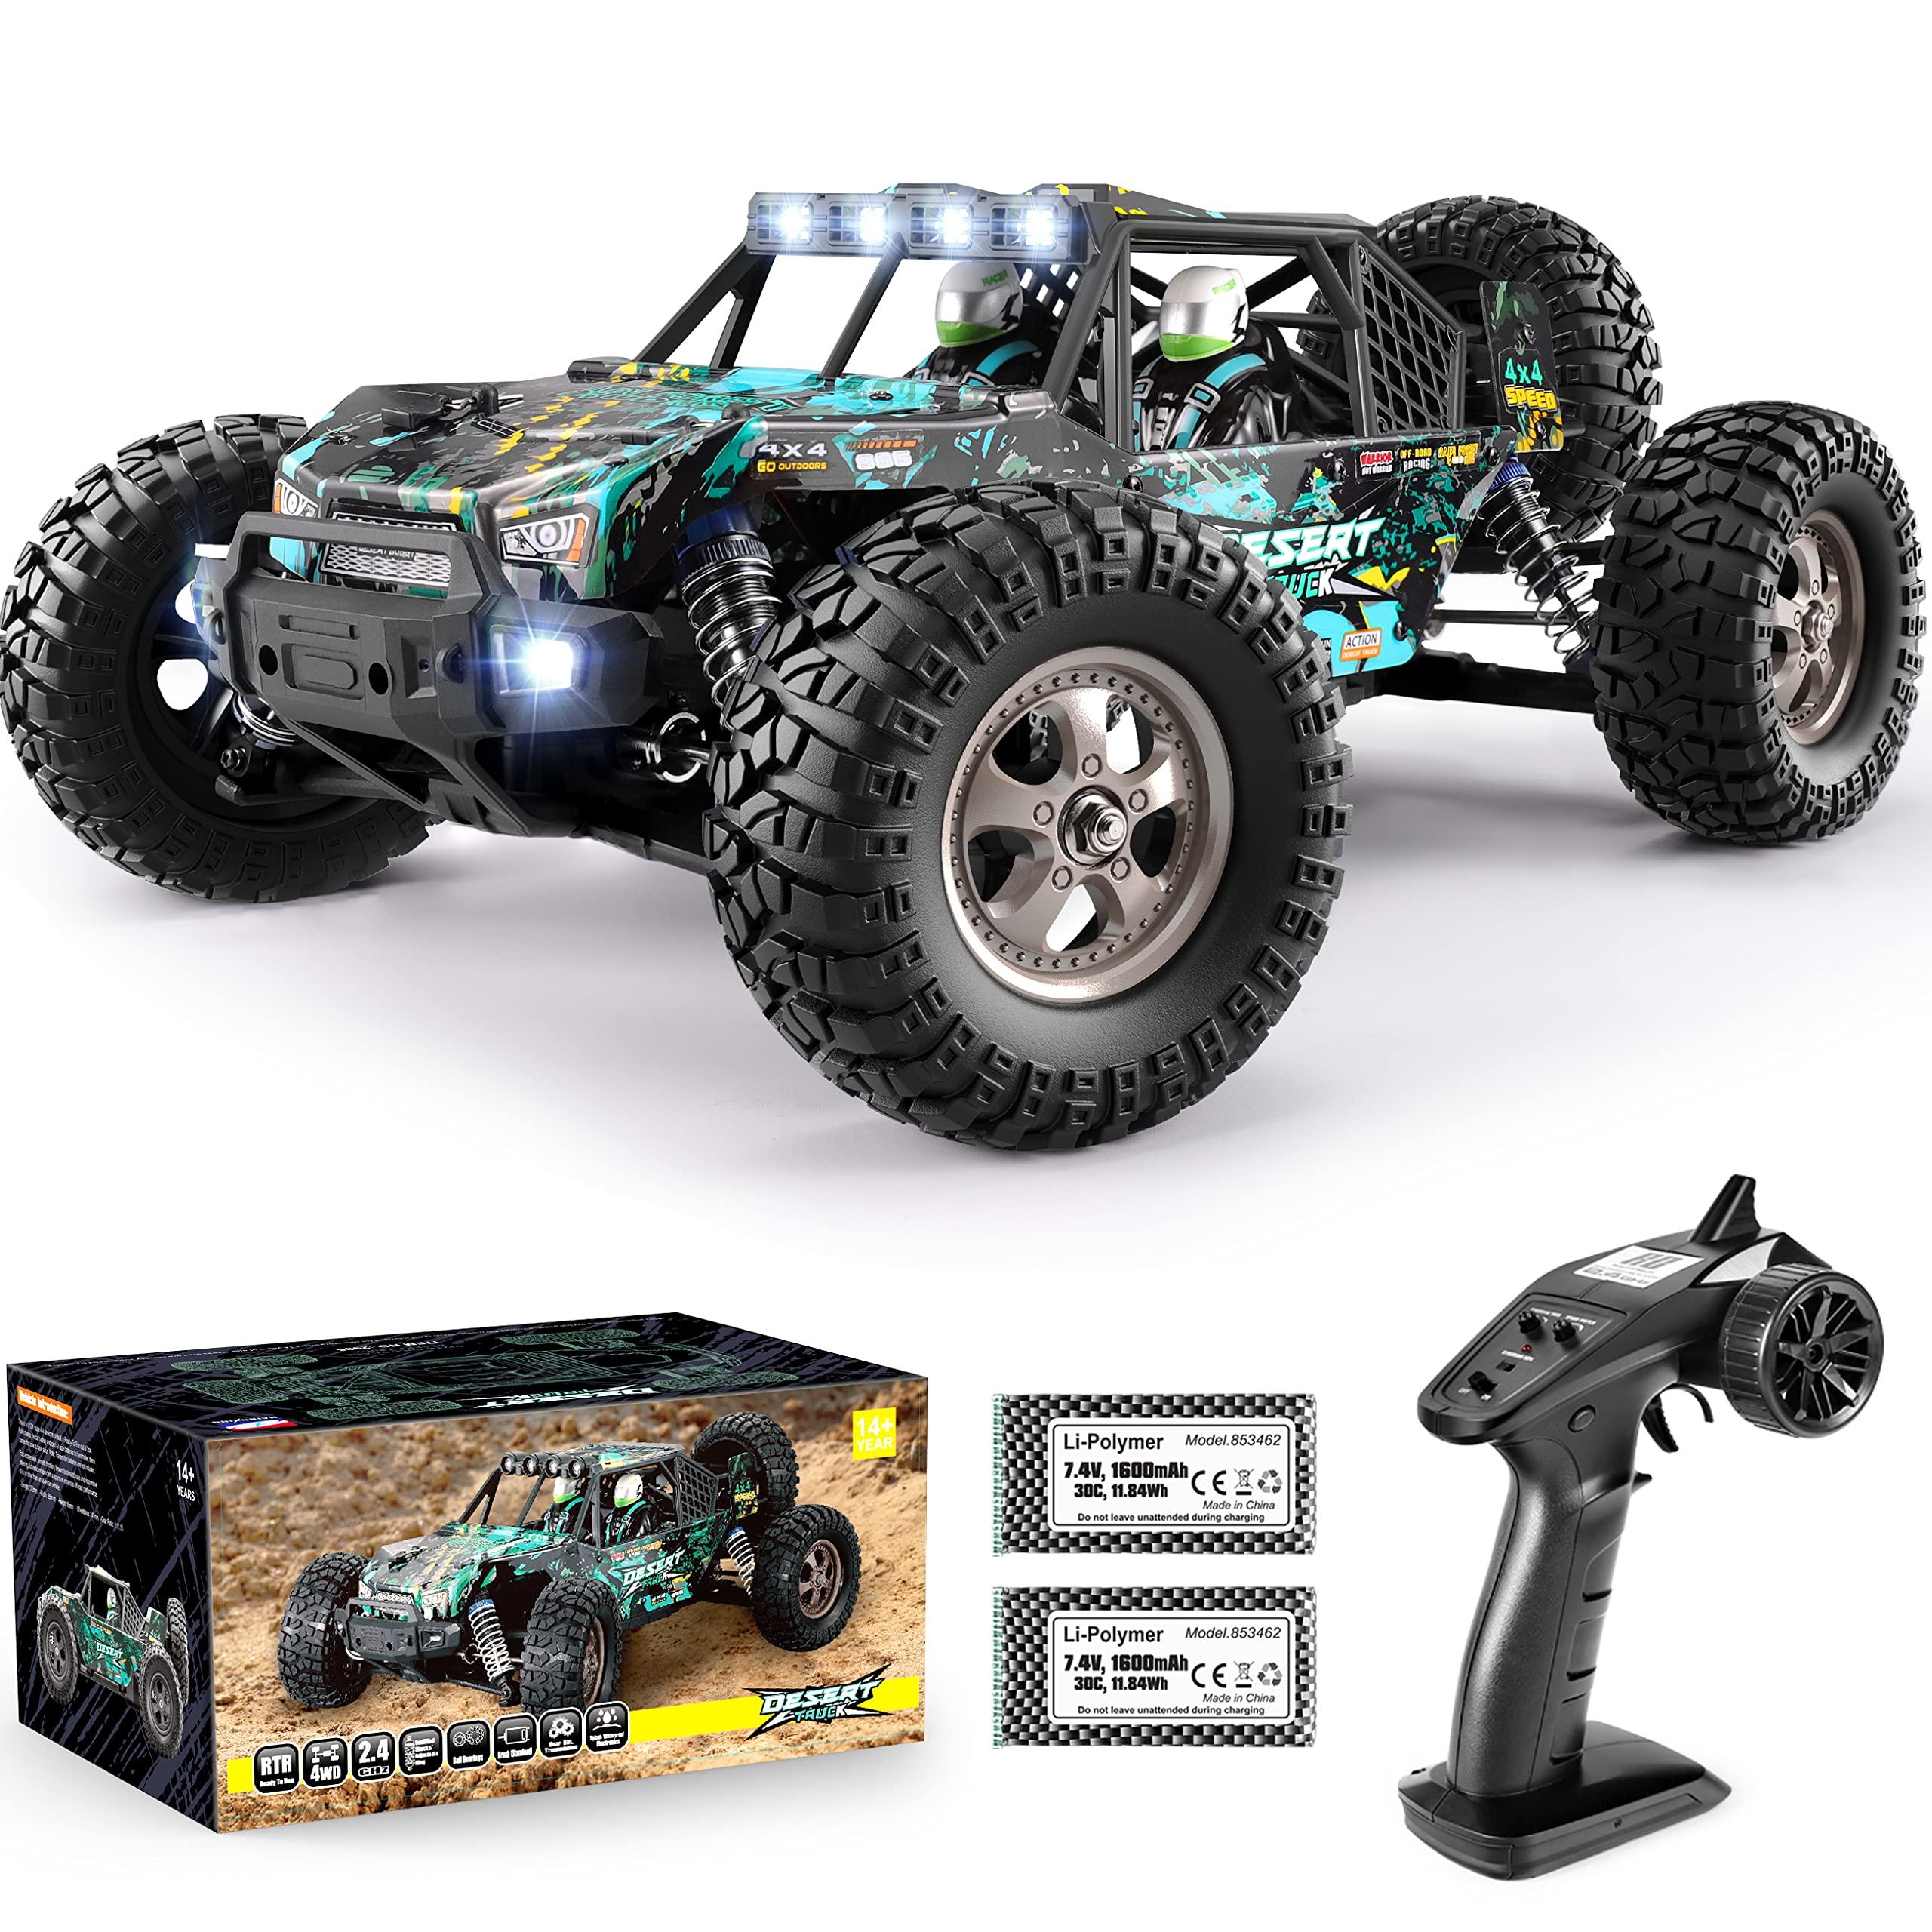 Haiboxing 16889 Brushless: Intuitive controls and advanced features make the Haiboxing 16889 brushless perfect for off-road racing enthusiasts.